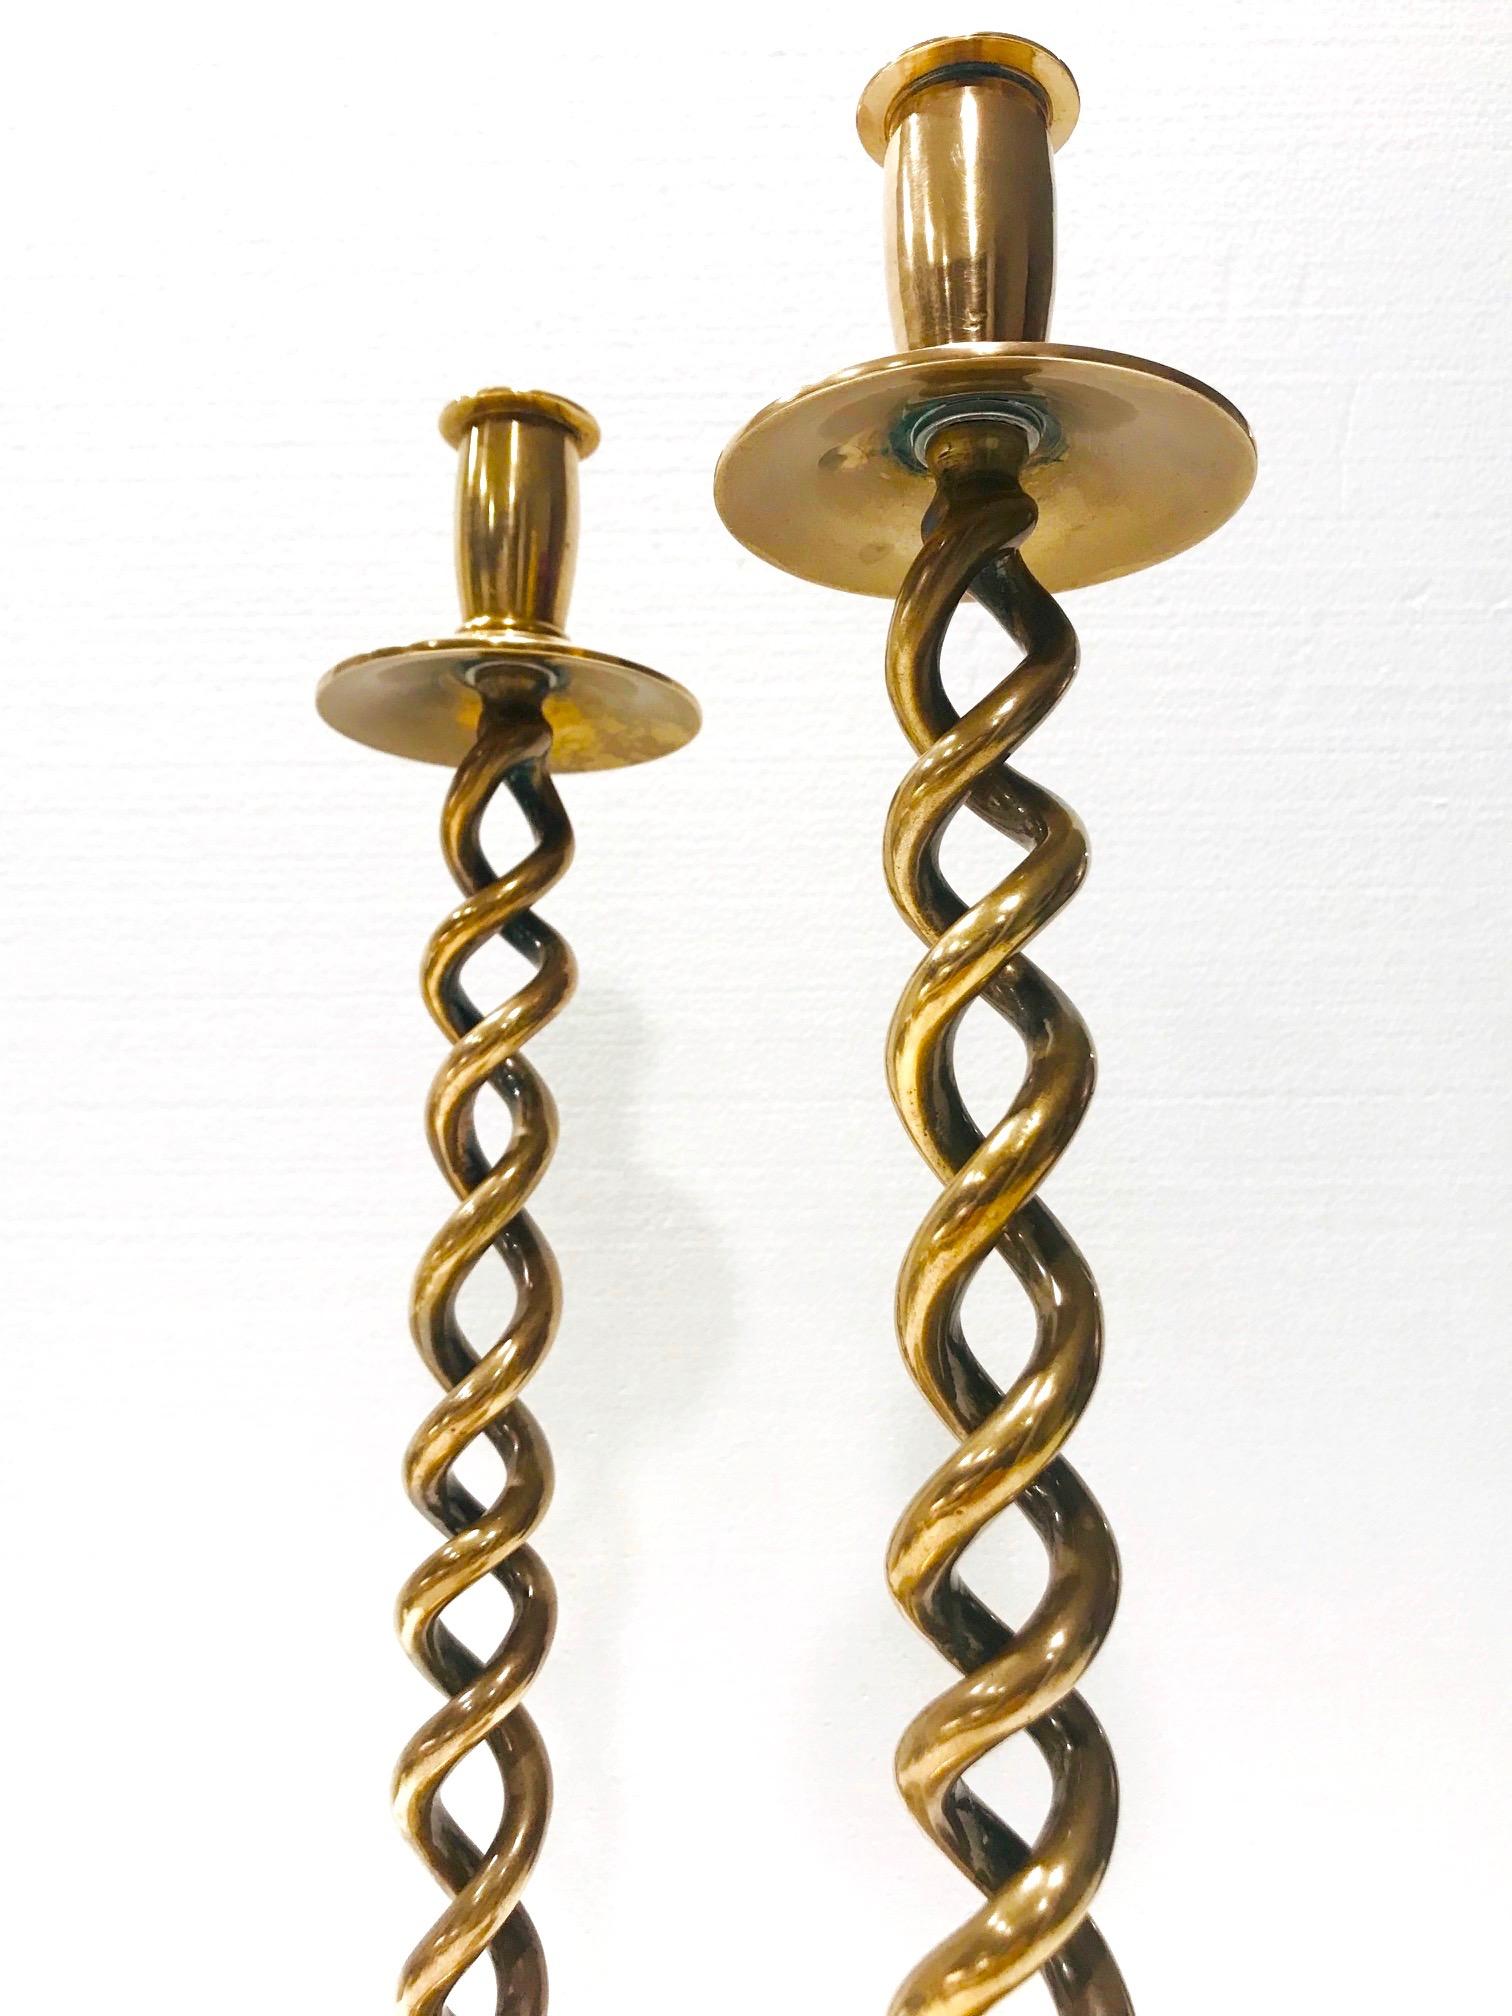 Pair of antique tall candleholders in cast brass metal. The candlesticks have open braided stems with a classic barley twist design and feature circular stepped bases. Solid weight with polished brass finish in hues of gold copper. Minor patina on